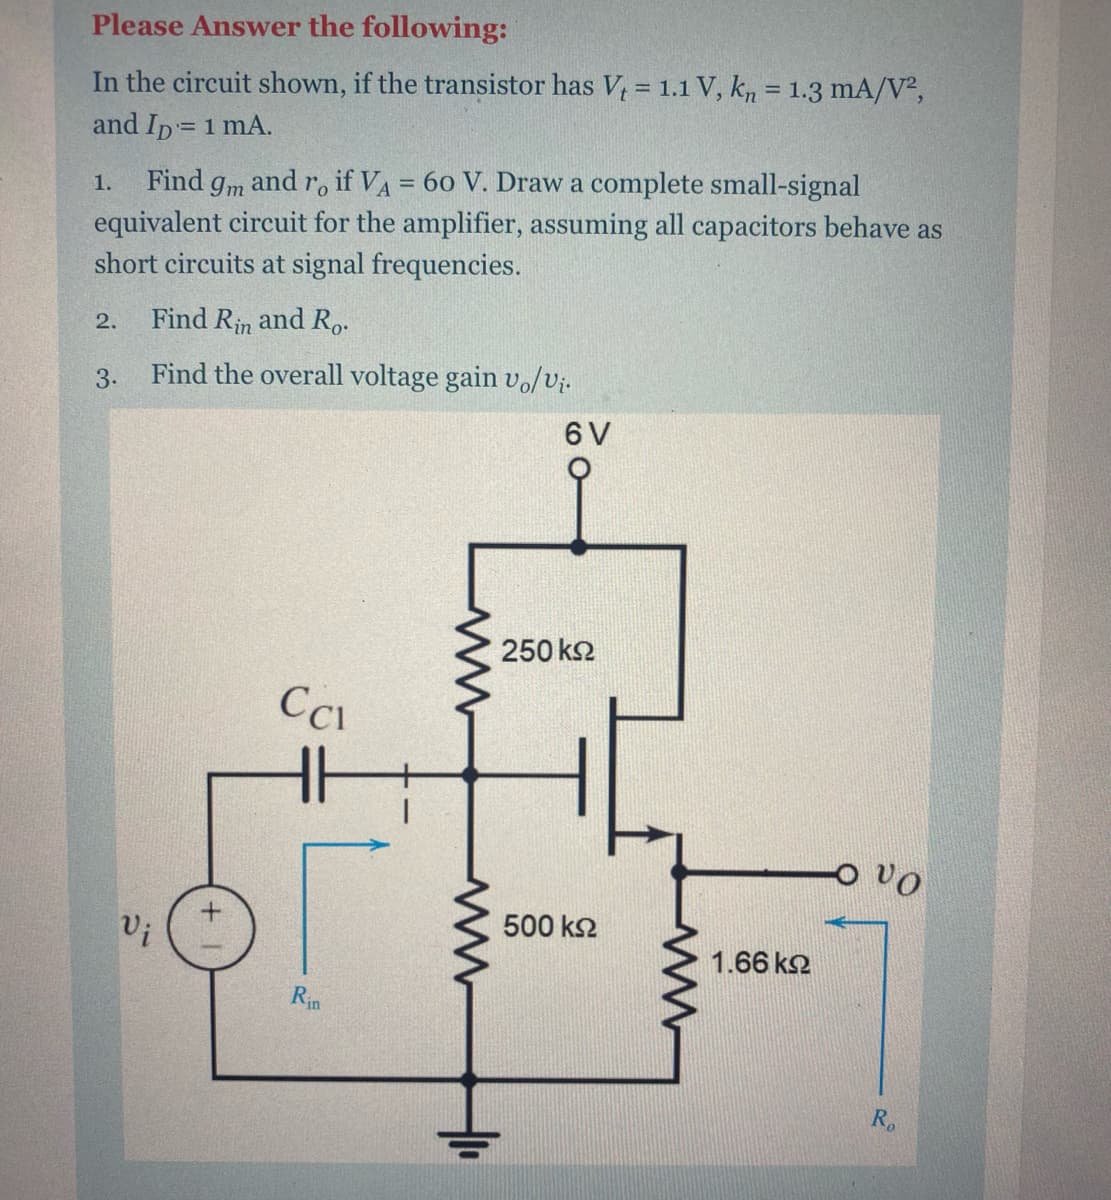 Please Answer the following:
In the circuit shown, if the transistor has V, = 1.1 V, kn = 1.3 mA/V²,
and Ip= 1 mA.
Find gm and r. if VA = 60 V. Draw a complete small-signal
equivalent circuit for the amplifier, assuming all capacitors behave as
short circuits at signal frequencies.
1.
2.
Find Rin and Ro.
3.
Find the overall voltage gain vo/Vị.
6 V
250 k2
ovo
500 k2
Vi
1.66 k2
Rin
R.
두
